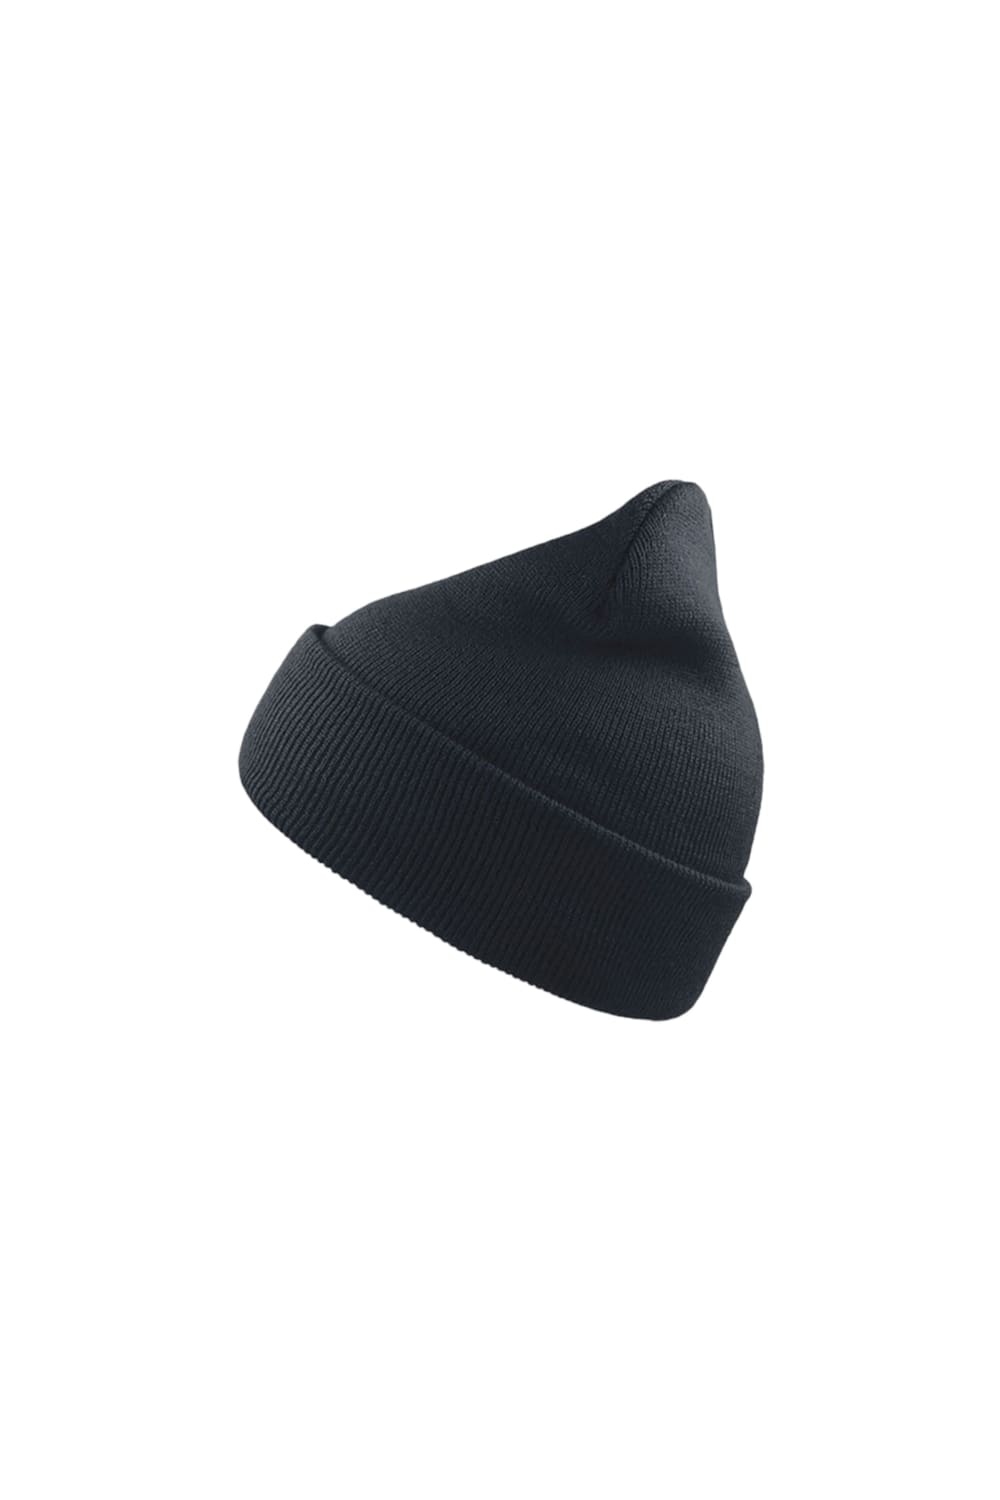 Wind Double Skin Beanie With Turn Up (Navy)